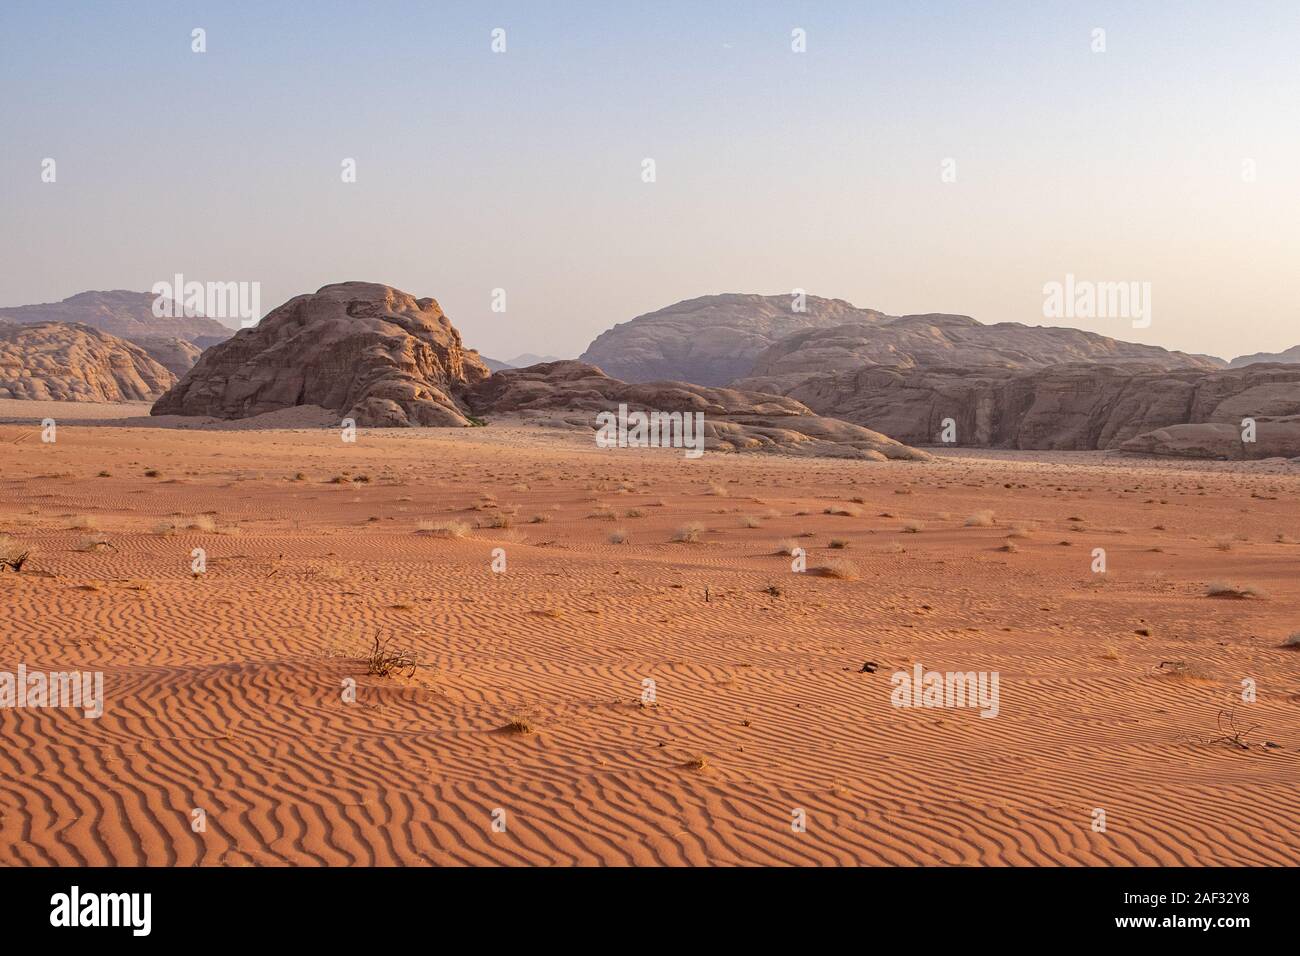 Desert scenery. Red sand plateau at the foot of the Edom mountains, Jordan Stock Photo